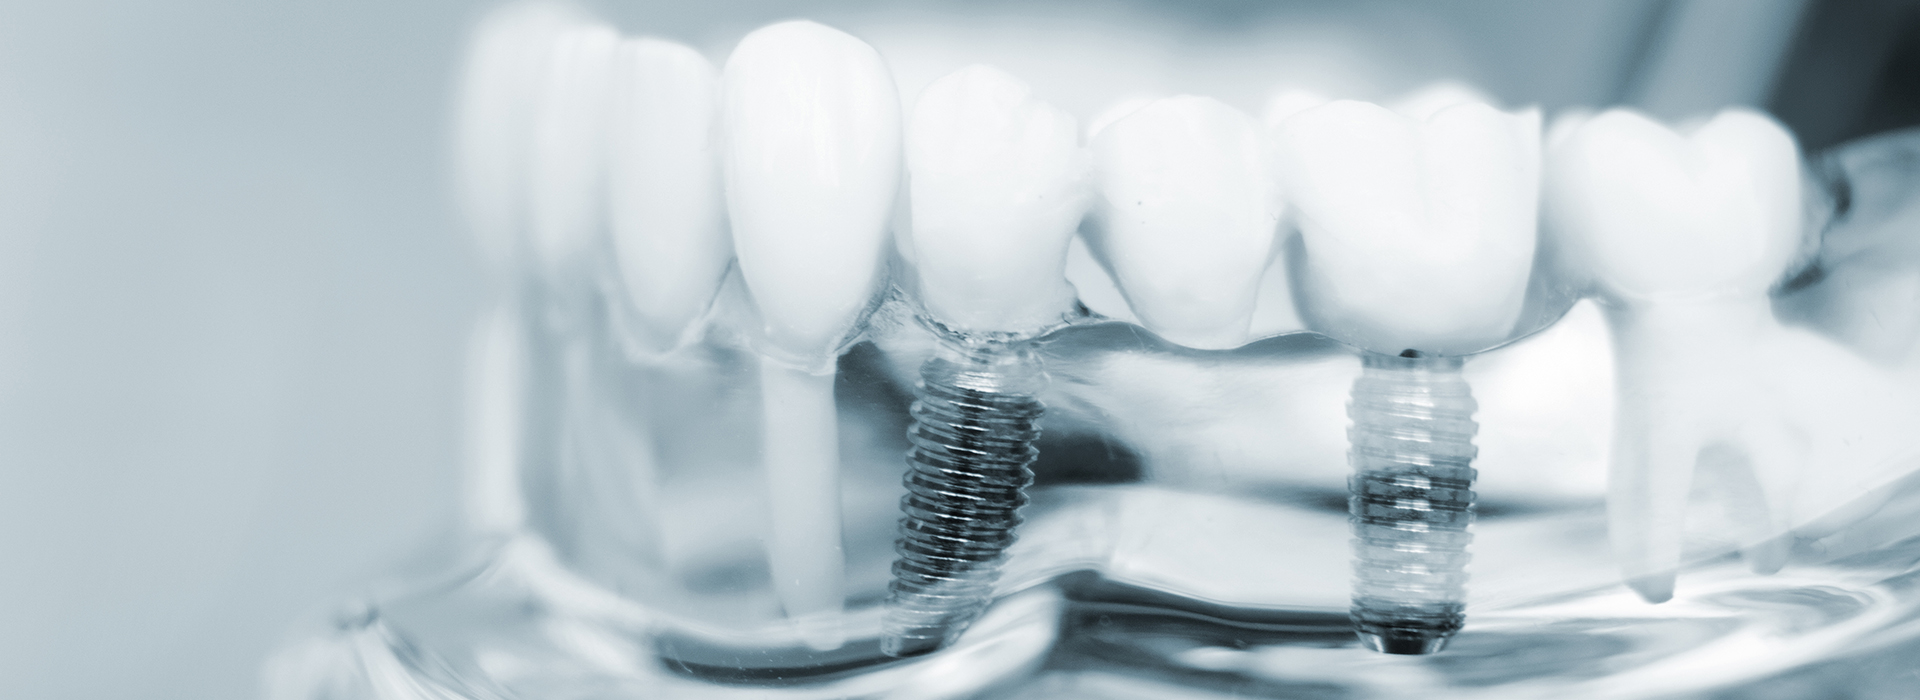 An up-close view of a dental implant with screws and a clear plastic cover, showcasing the technology used in oral health care.